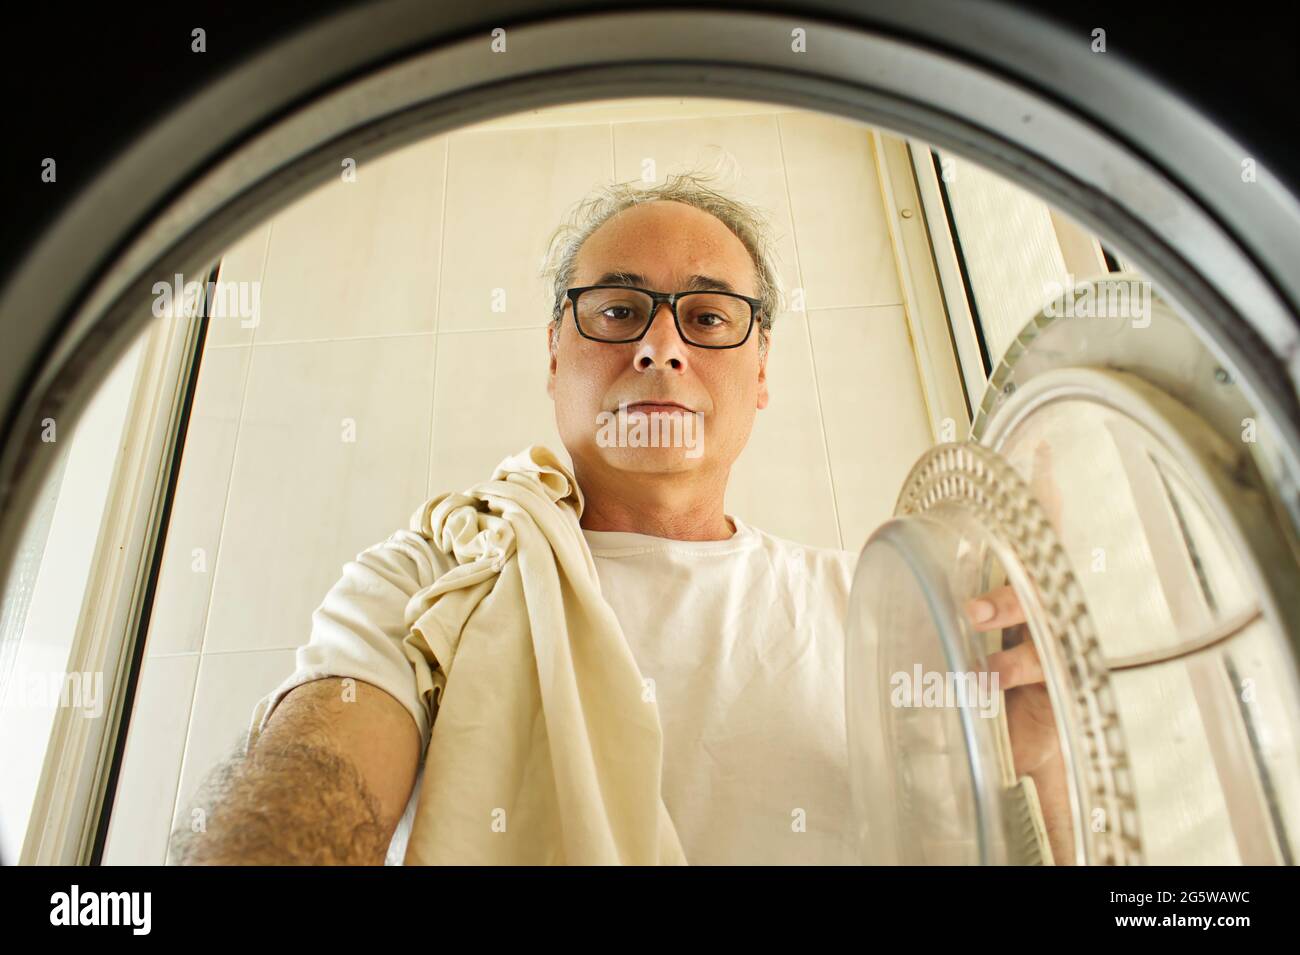 mature man taking clothes out of the washing machine seen from inside at home Stock Photo